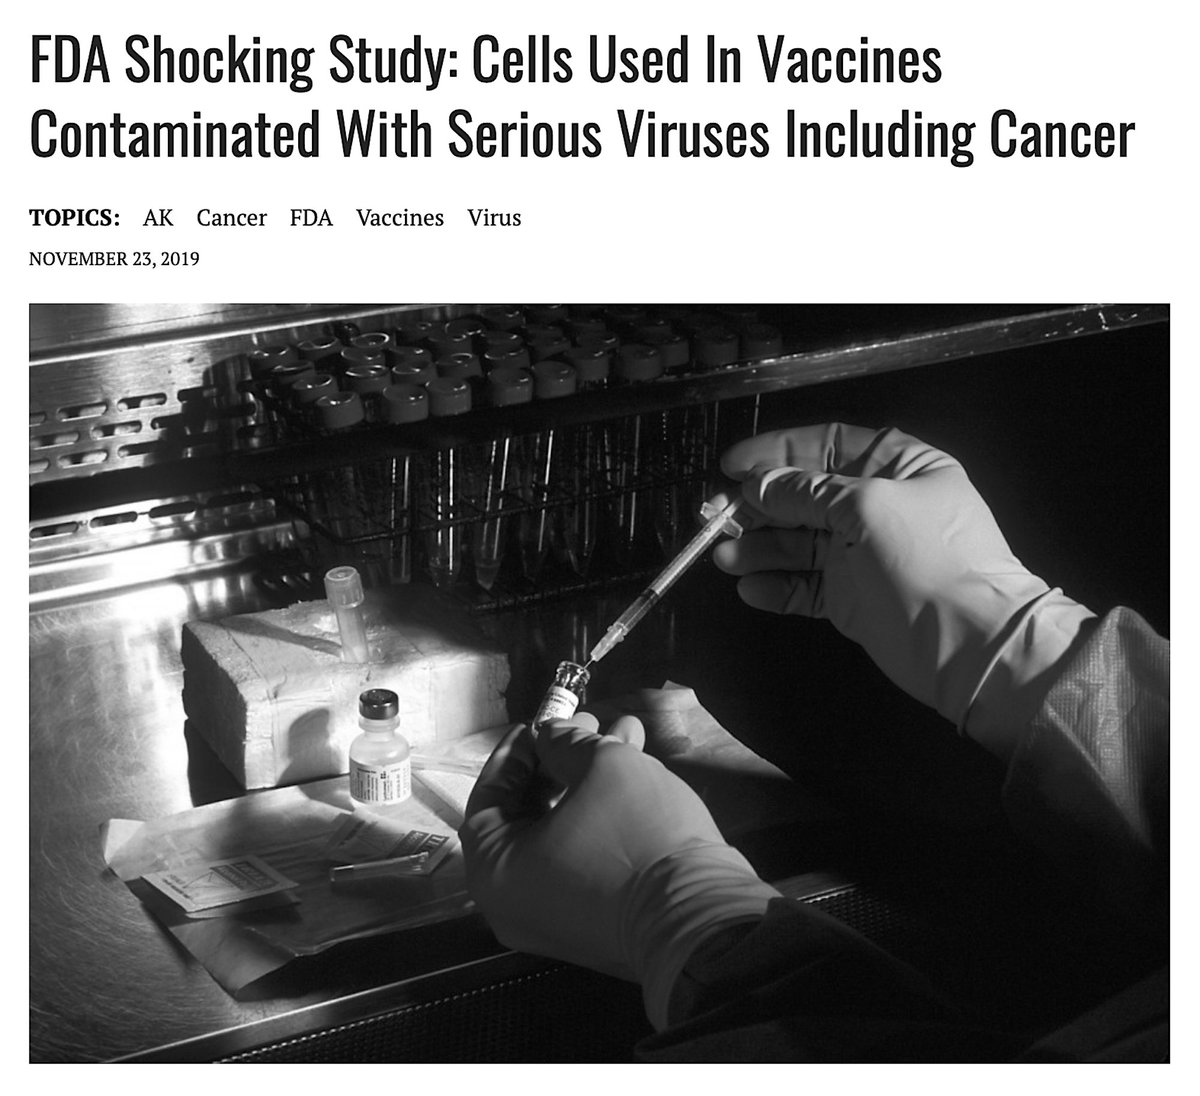 'These Latent, Or ‘Quiet,’ Viruses Pose A Potential Threat, Since They Might Become Active Under Vaccine Manufacturing Conditions.'Active Post, November 23, 2019 https://www.activistpost.com/2019/11/fda-shocking-study-cells-used-in-vaccines-contaminated-with-serious-viruses-including-cancer.html